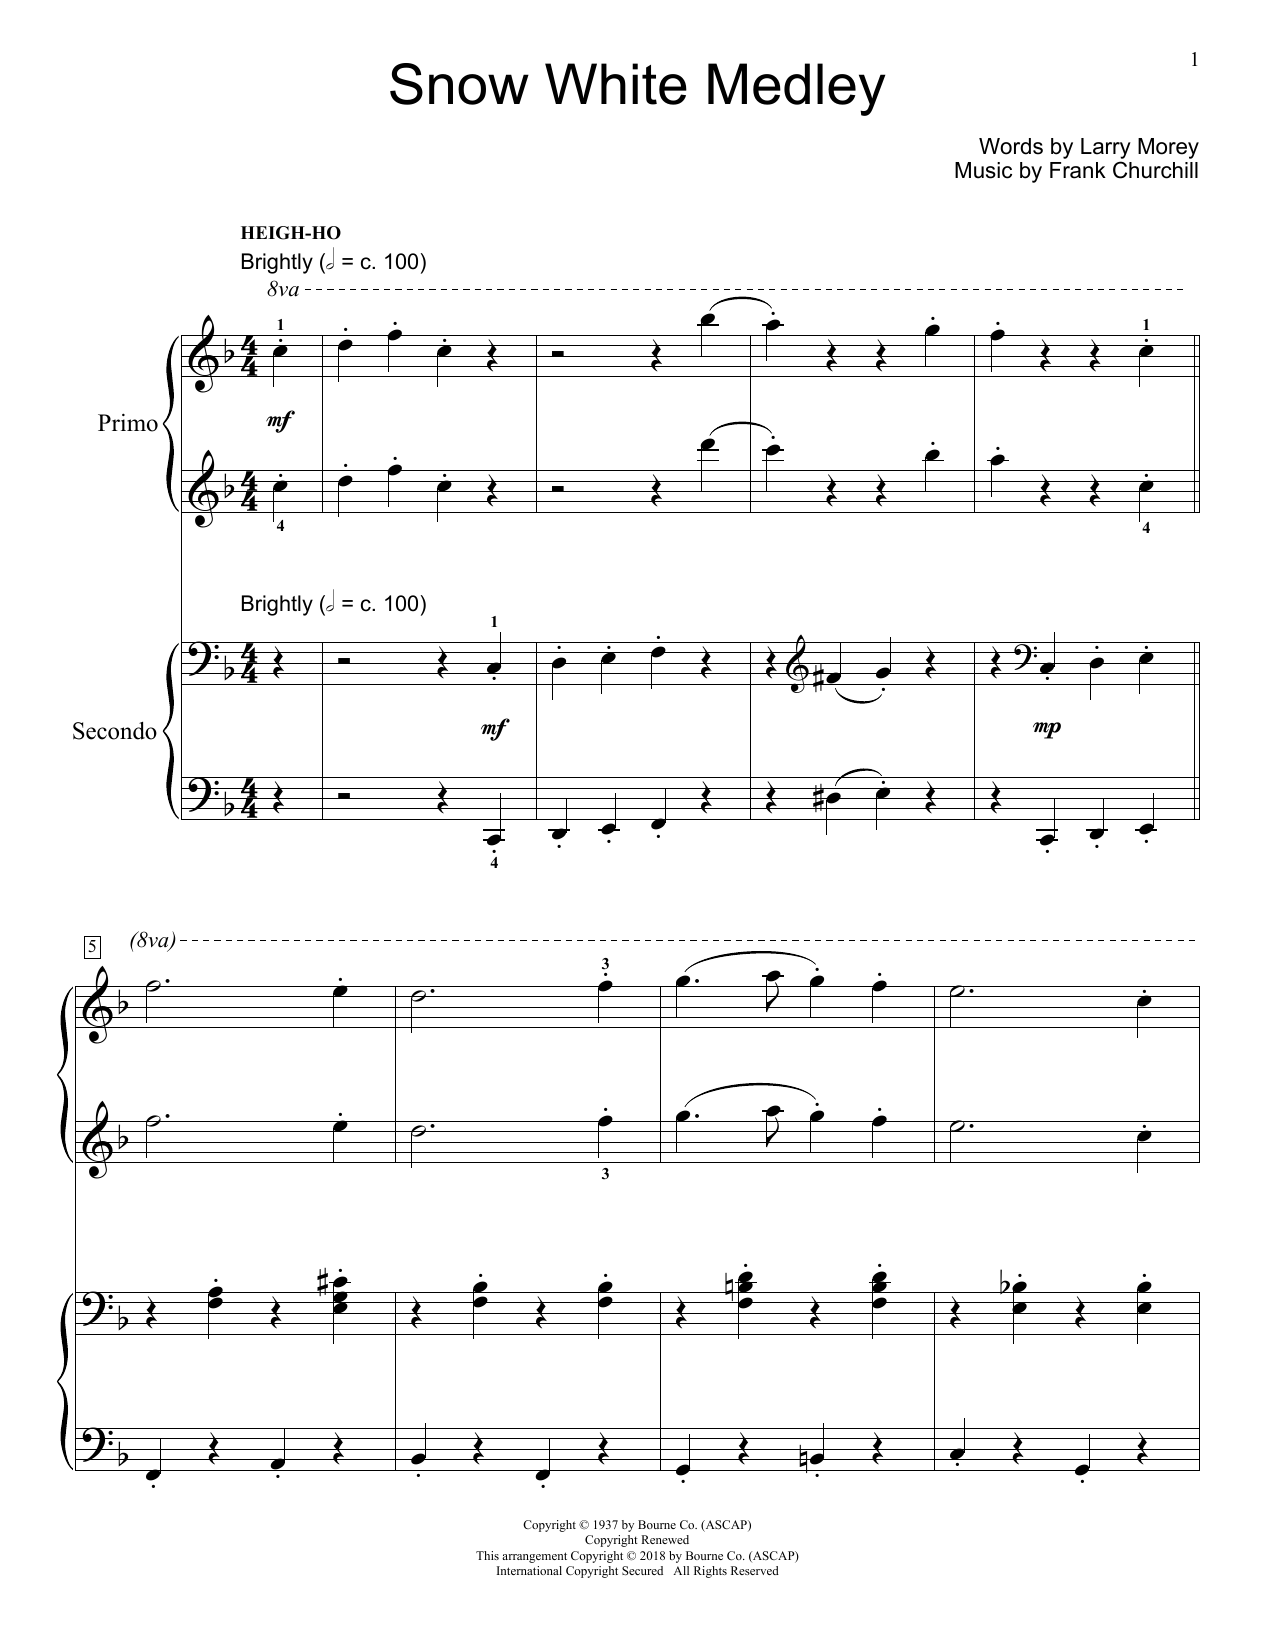 Download Jennifer and Mike Watts Snow White Medley Sheet Music